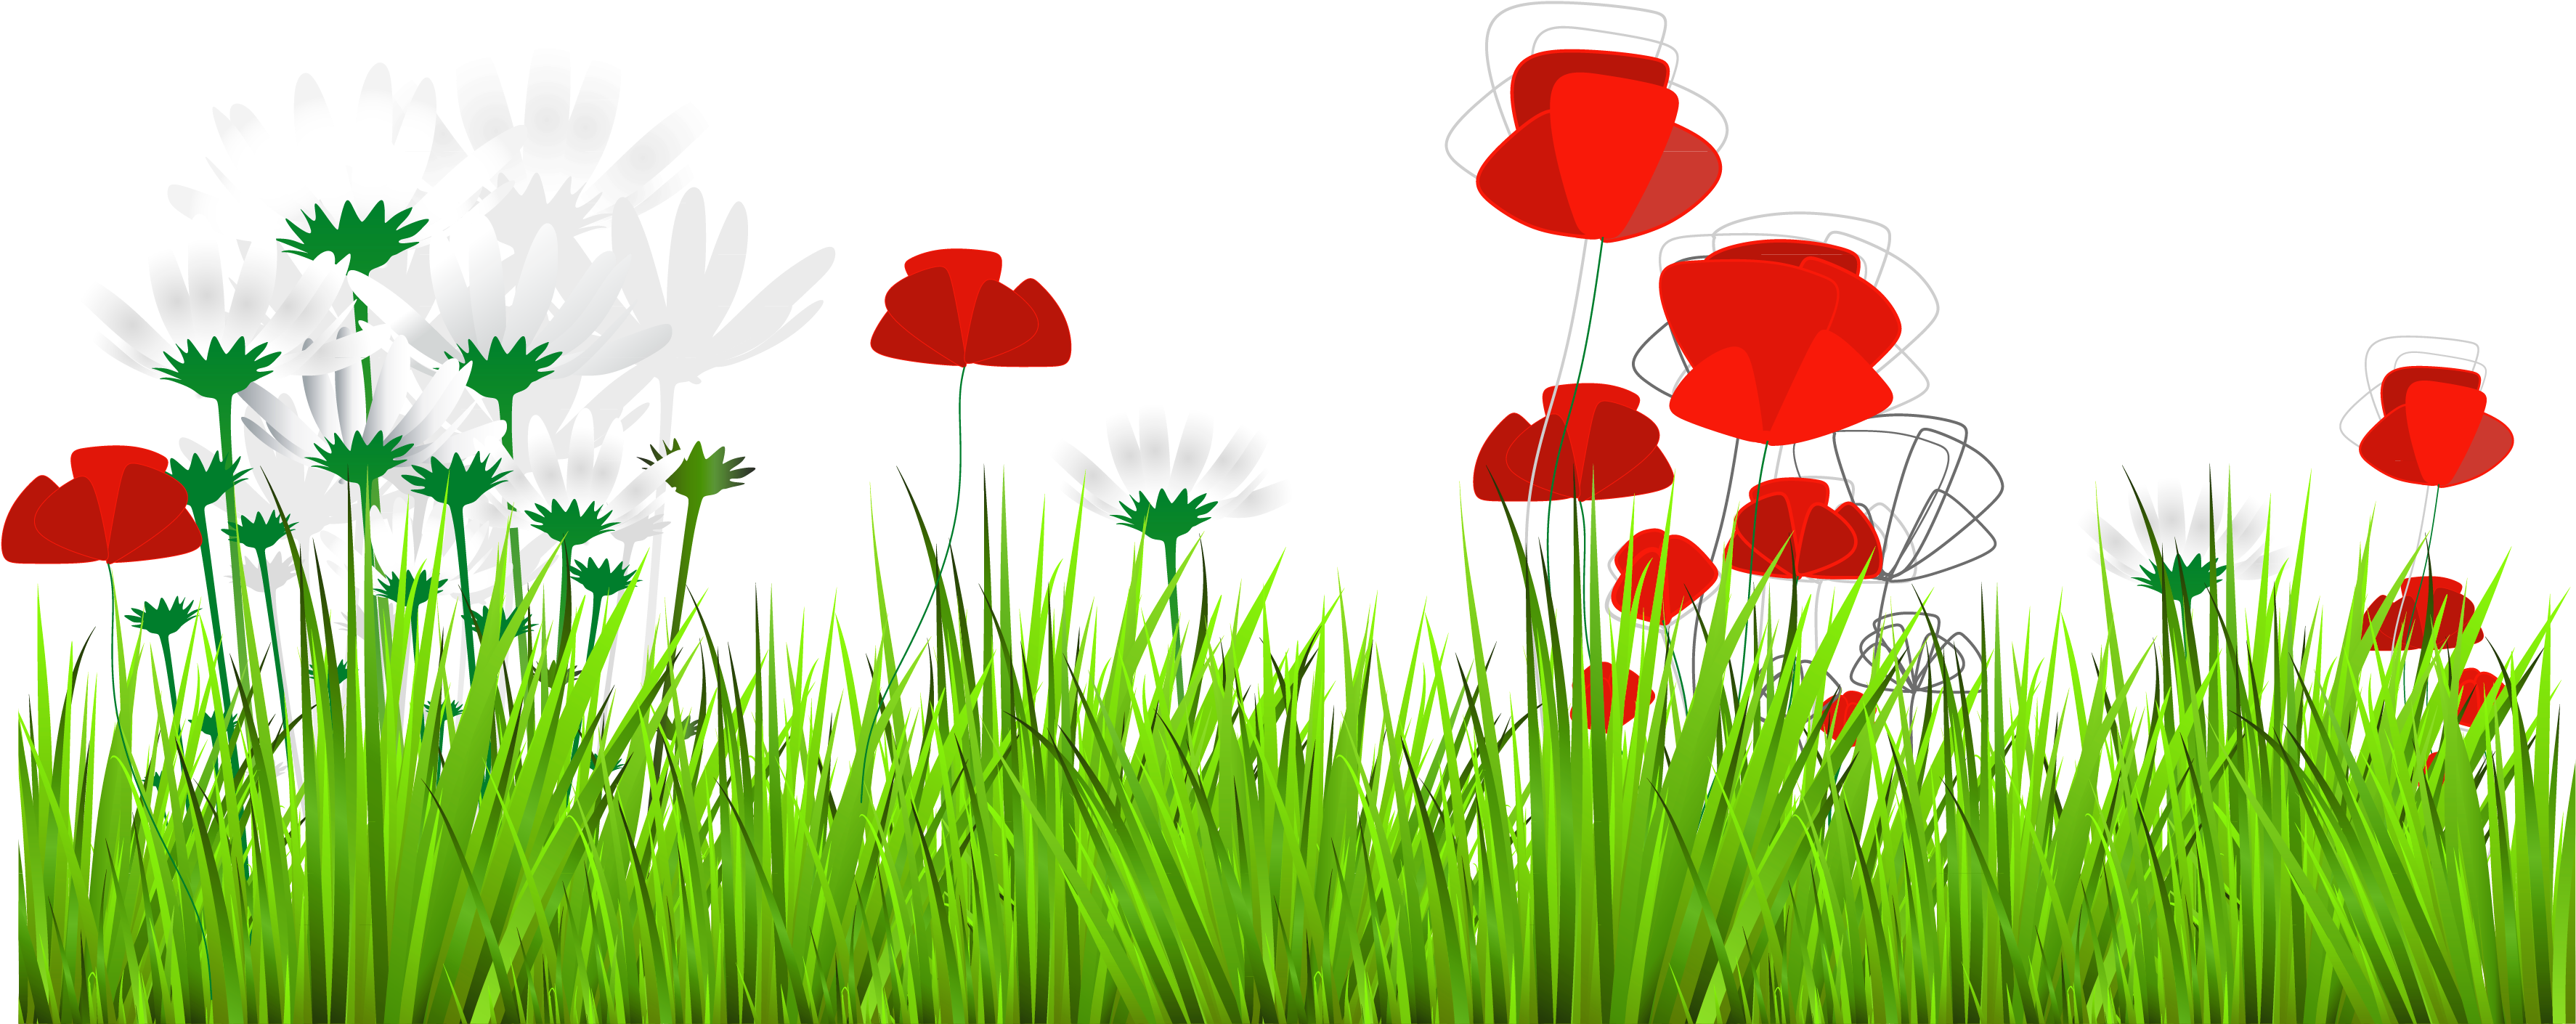 A Group Of Flowers In Grass